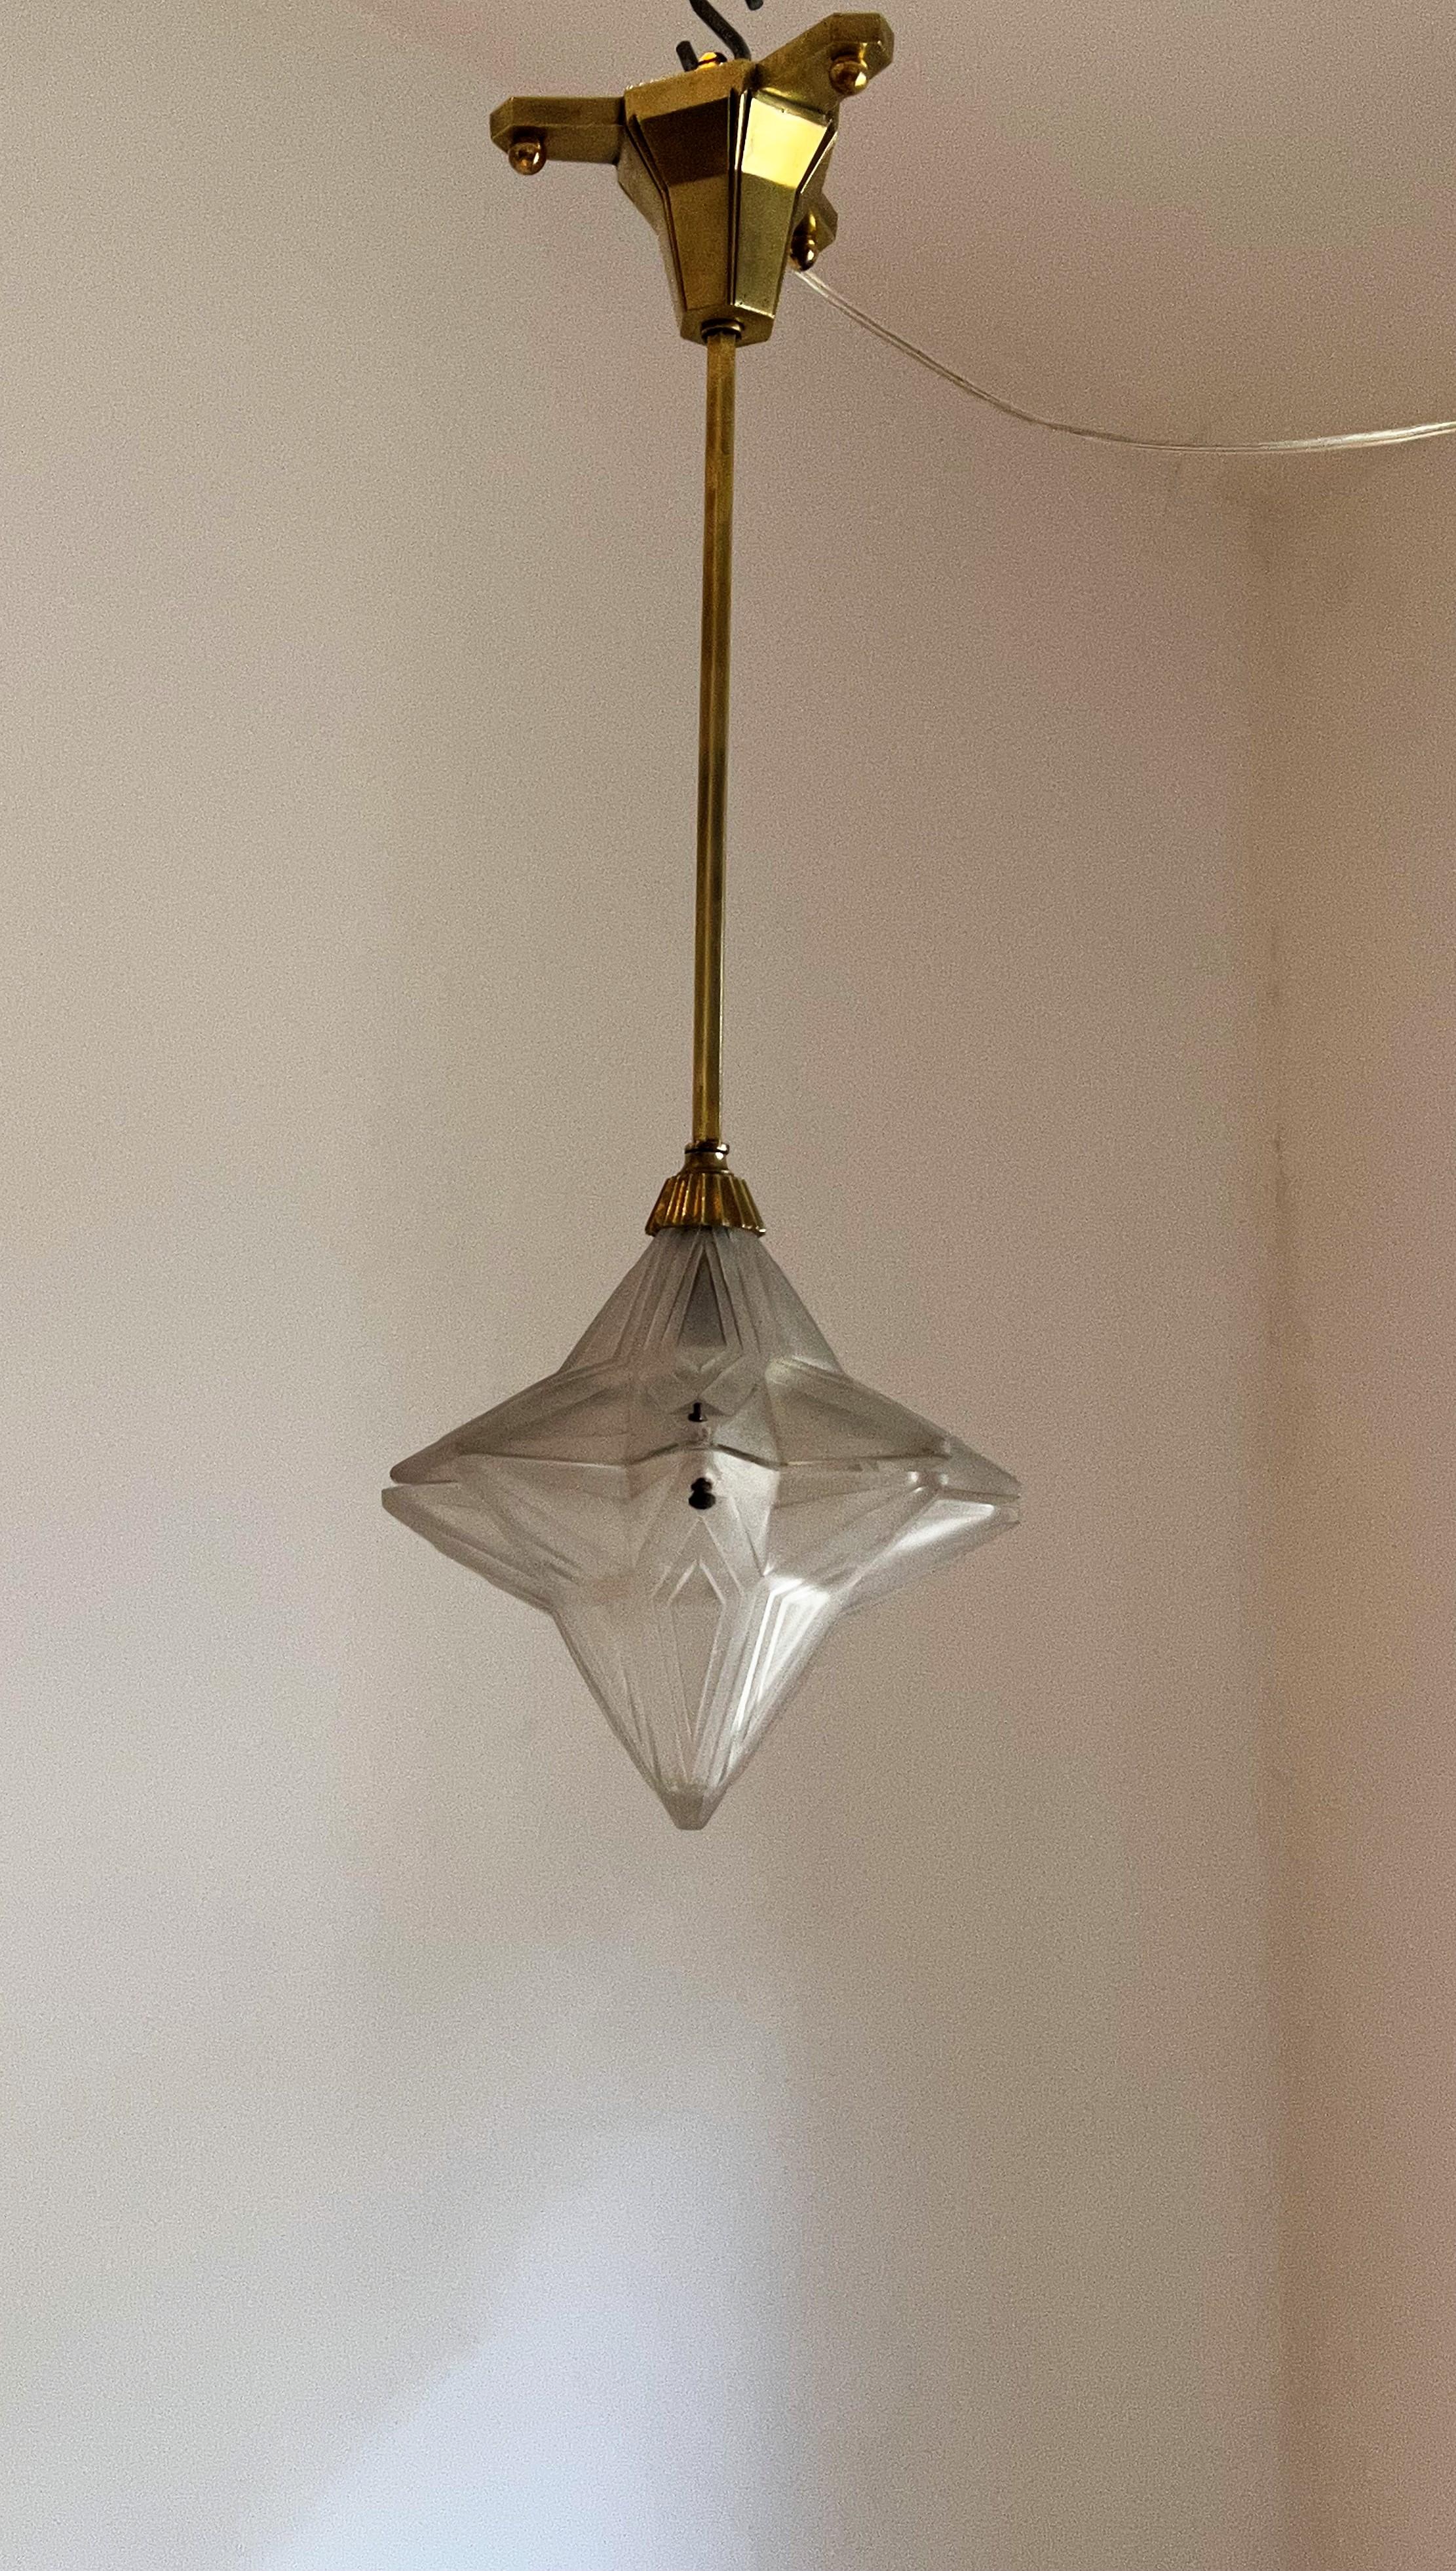 Gorgeous Art Deco hall lantern by Genet Michon manufactured in brass and pressed glass in the shape of a star.
The glass is signed, there are a couple of small chips that do not show once its hung.
This lantern can be hung or mounted flush as the 3